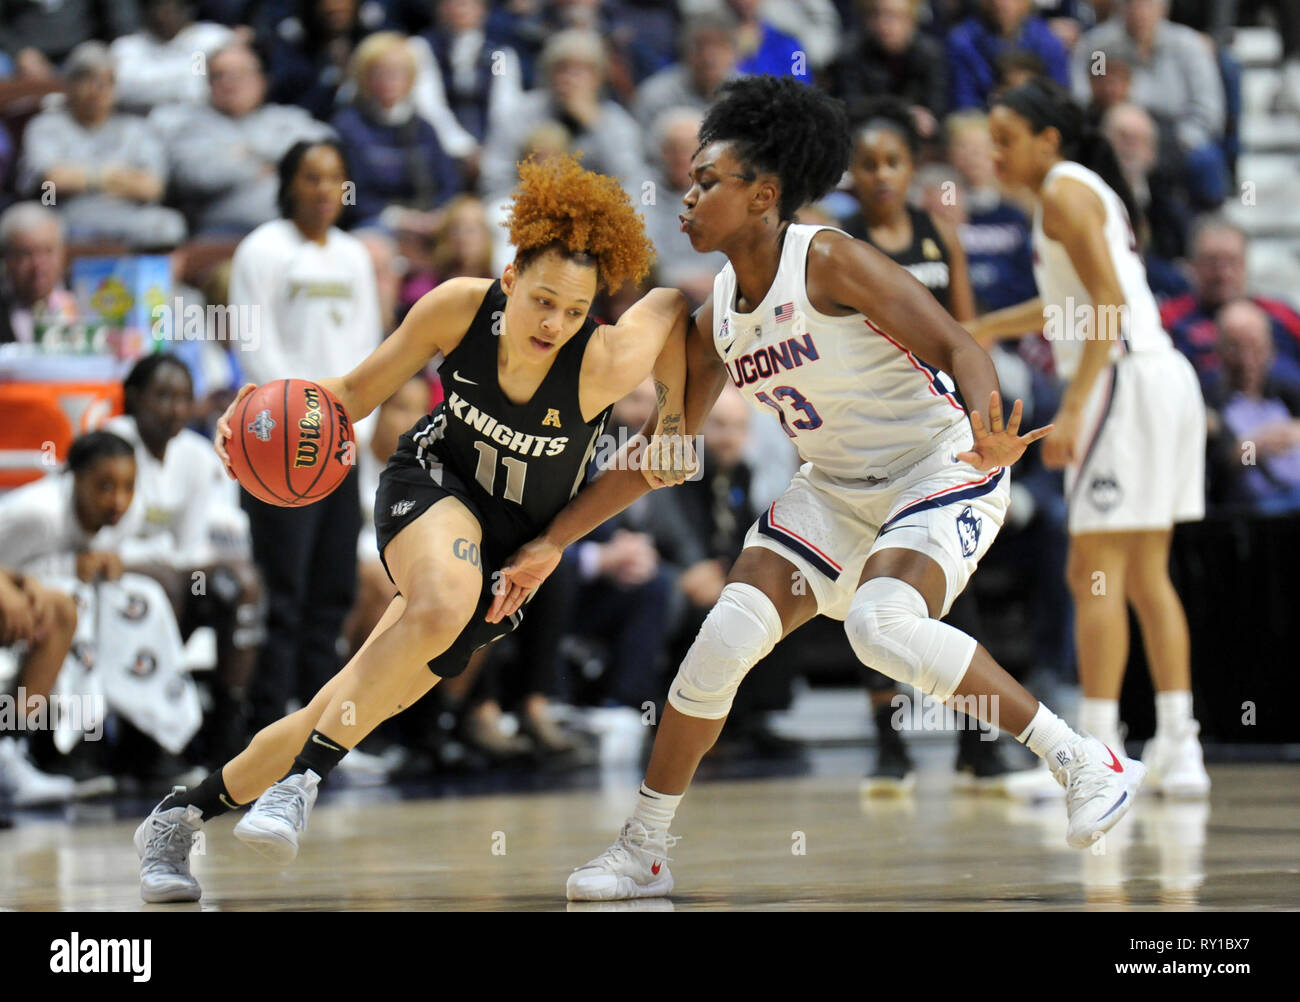 Uncasville, CT, USA. 11th Mar, 2019. Kayla Thigpen (11) of the UCF Knights tries to get past Uconn defender Christyn Williams (13) during the NCAA American Conference Basketball Tournament Championship game at Mohegan Sun Arena in Uncasville, CT. Gregory Vasil/CSM/Alamy Live News Stock Photo